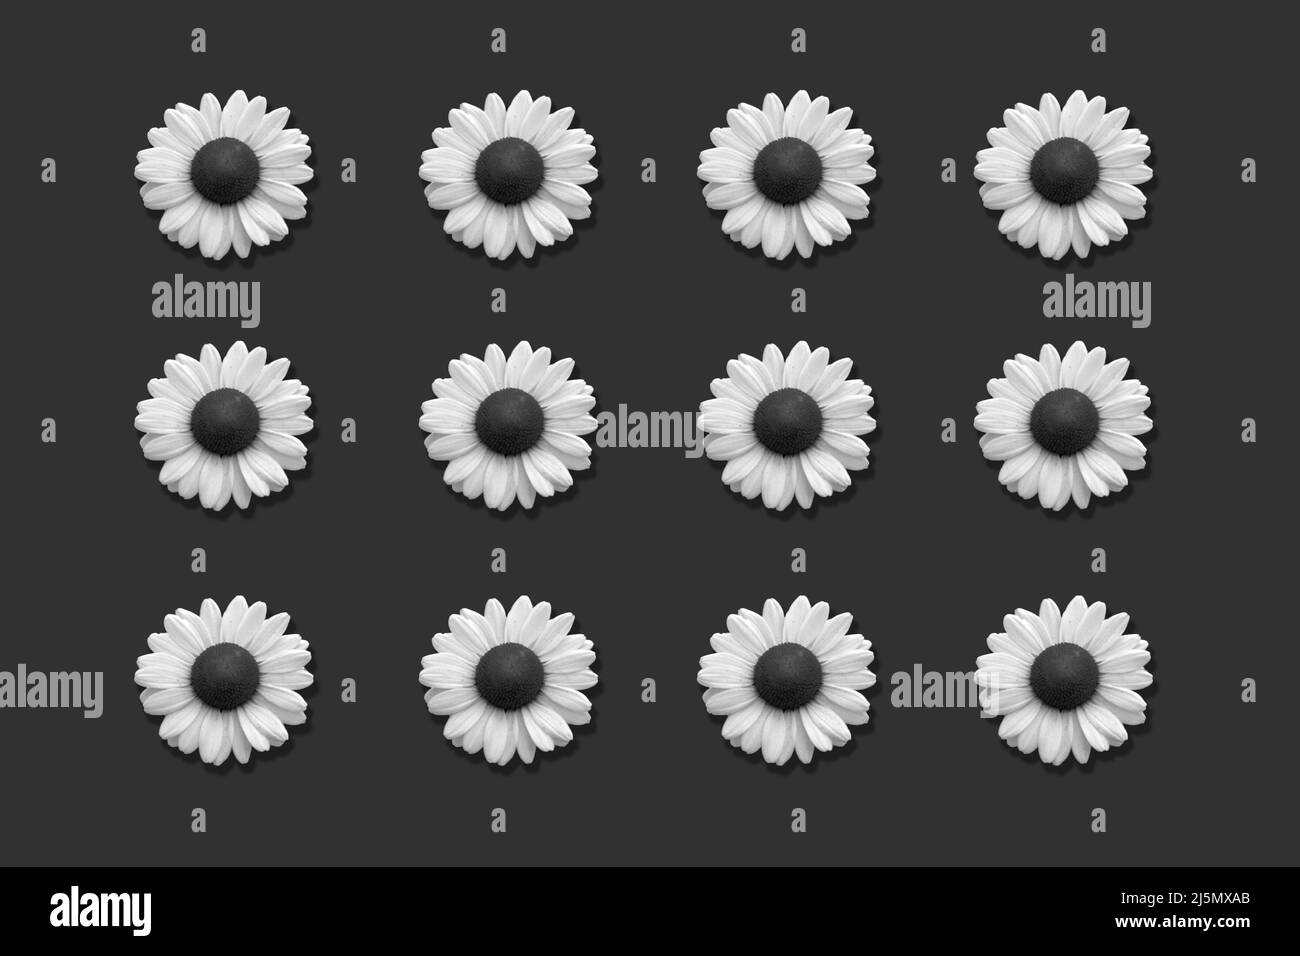 Floral pattern of daisies isolated on dark grey background. Black and white image Stock Photo